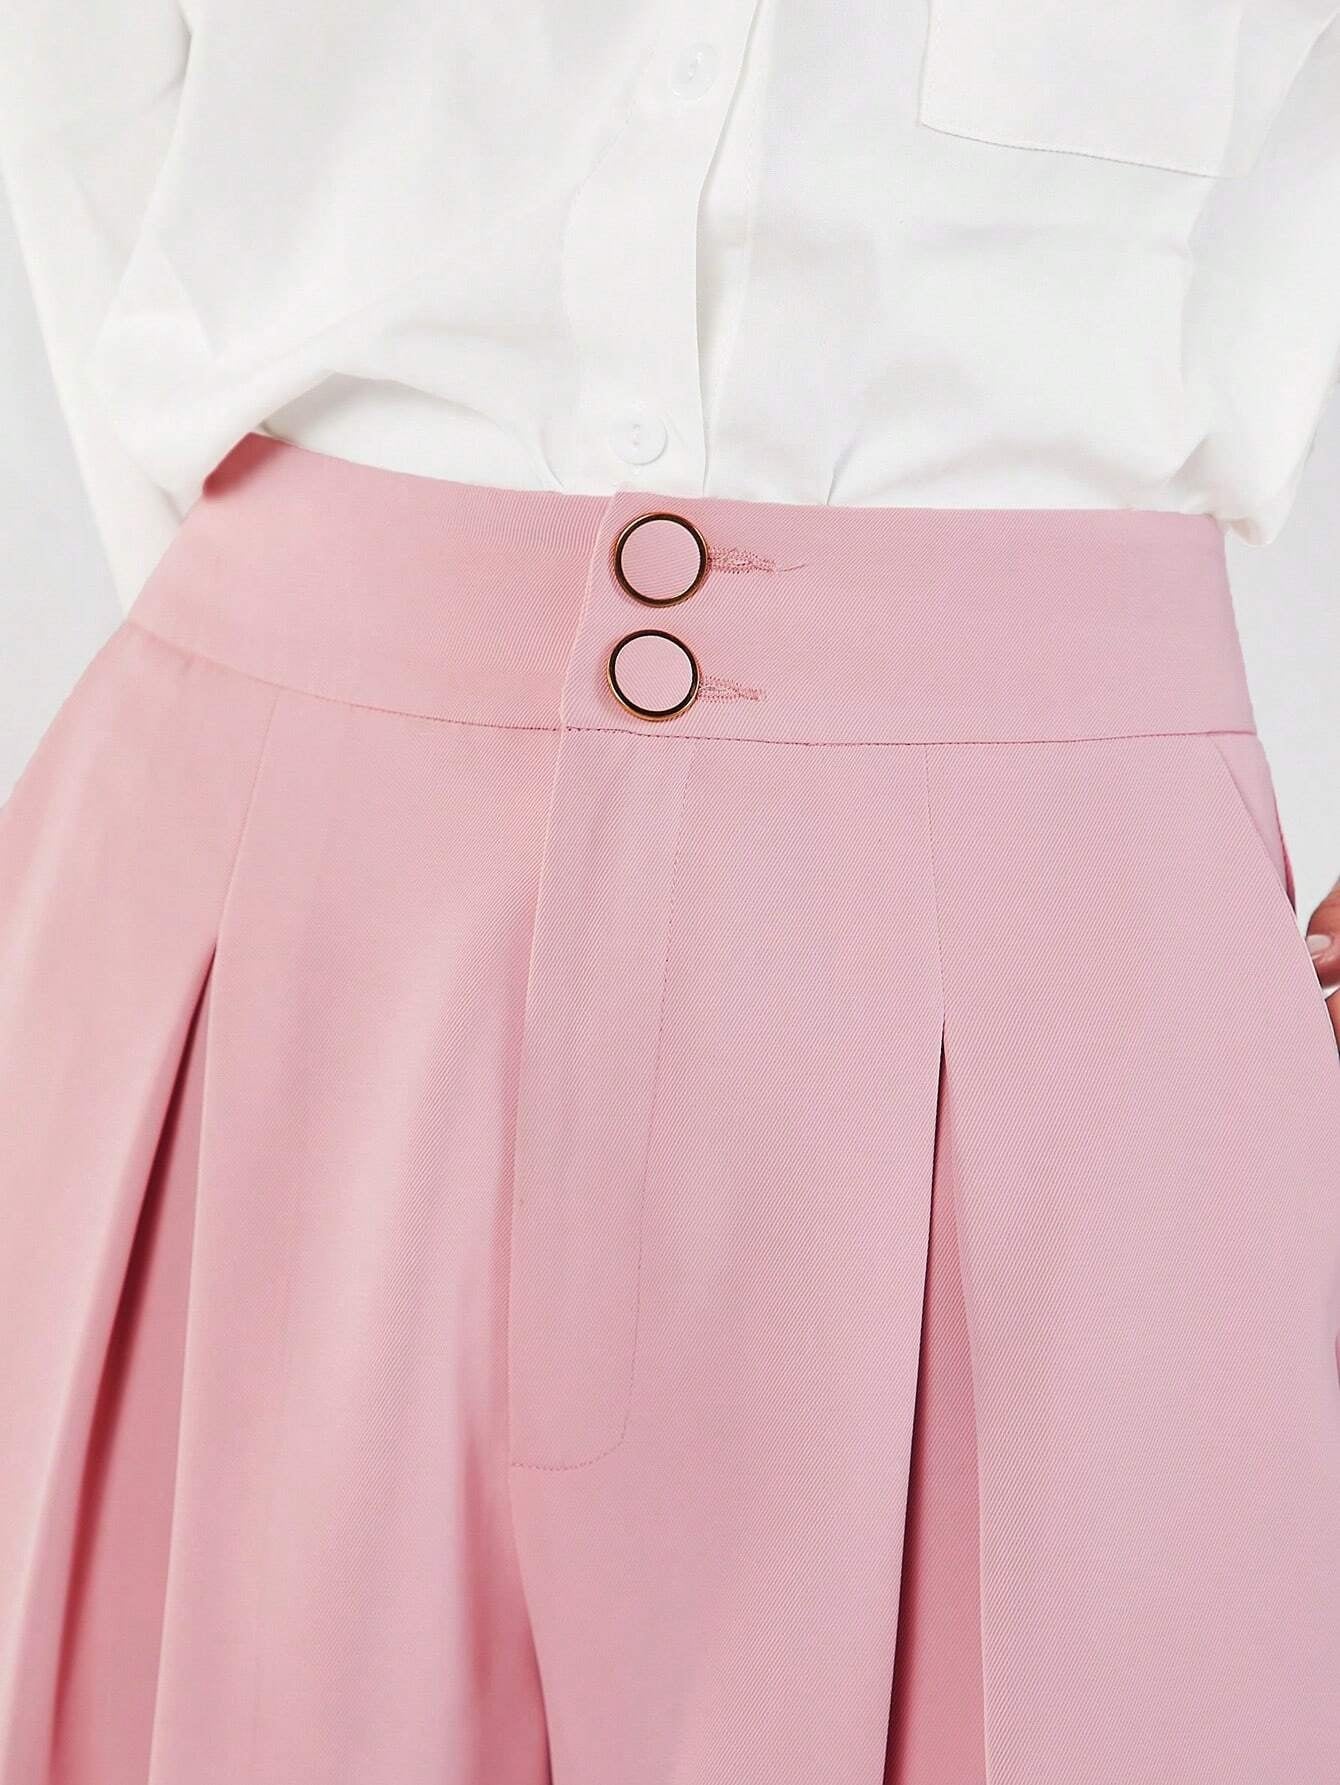 CM-BS994970 Women Casual Seoul Style Solid Fold Pleated Wide Leg Shorts - Baby Pink